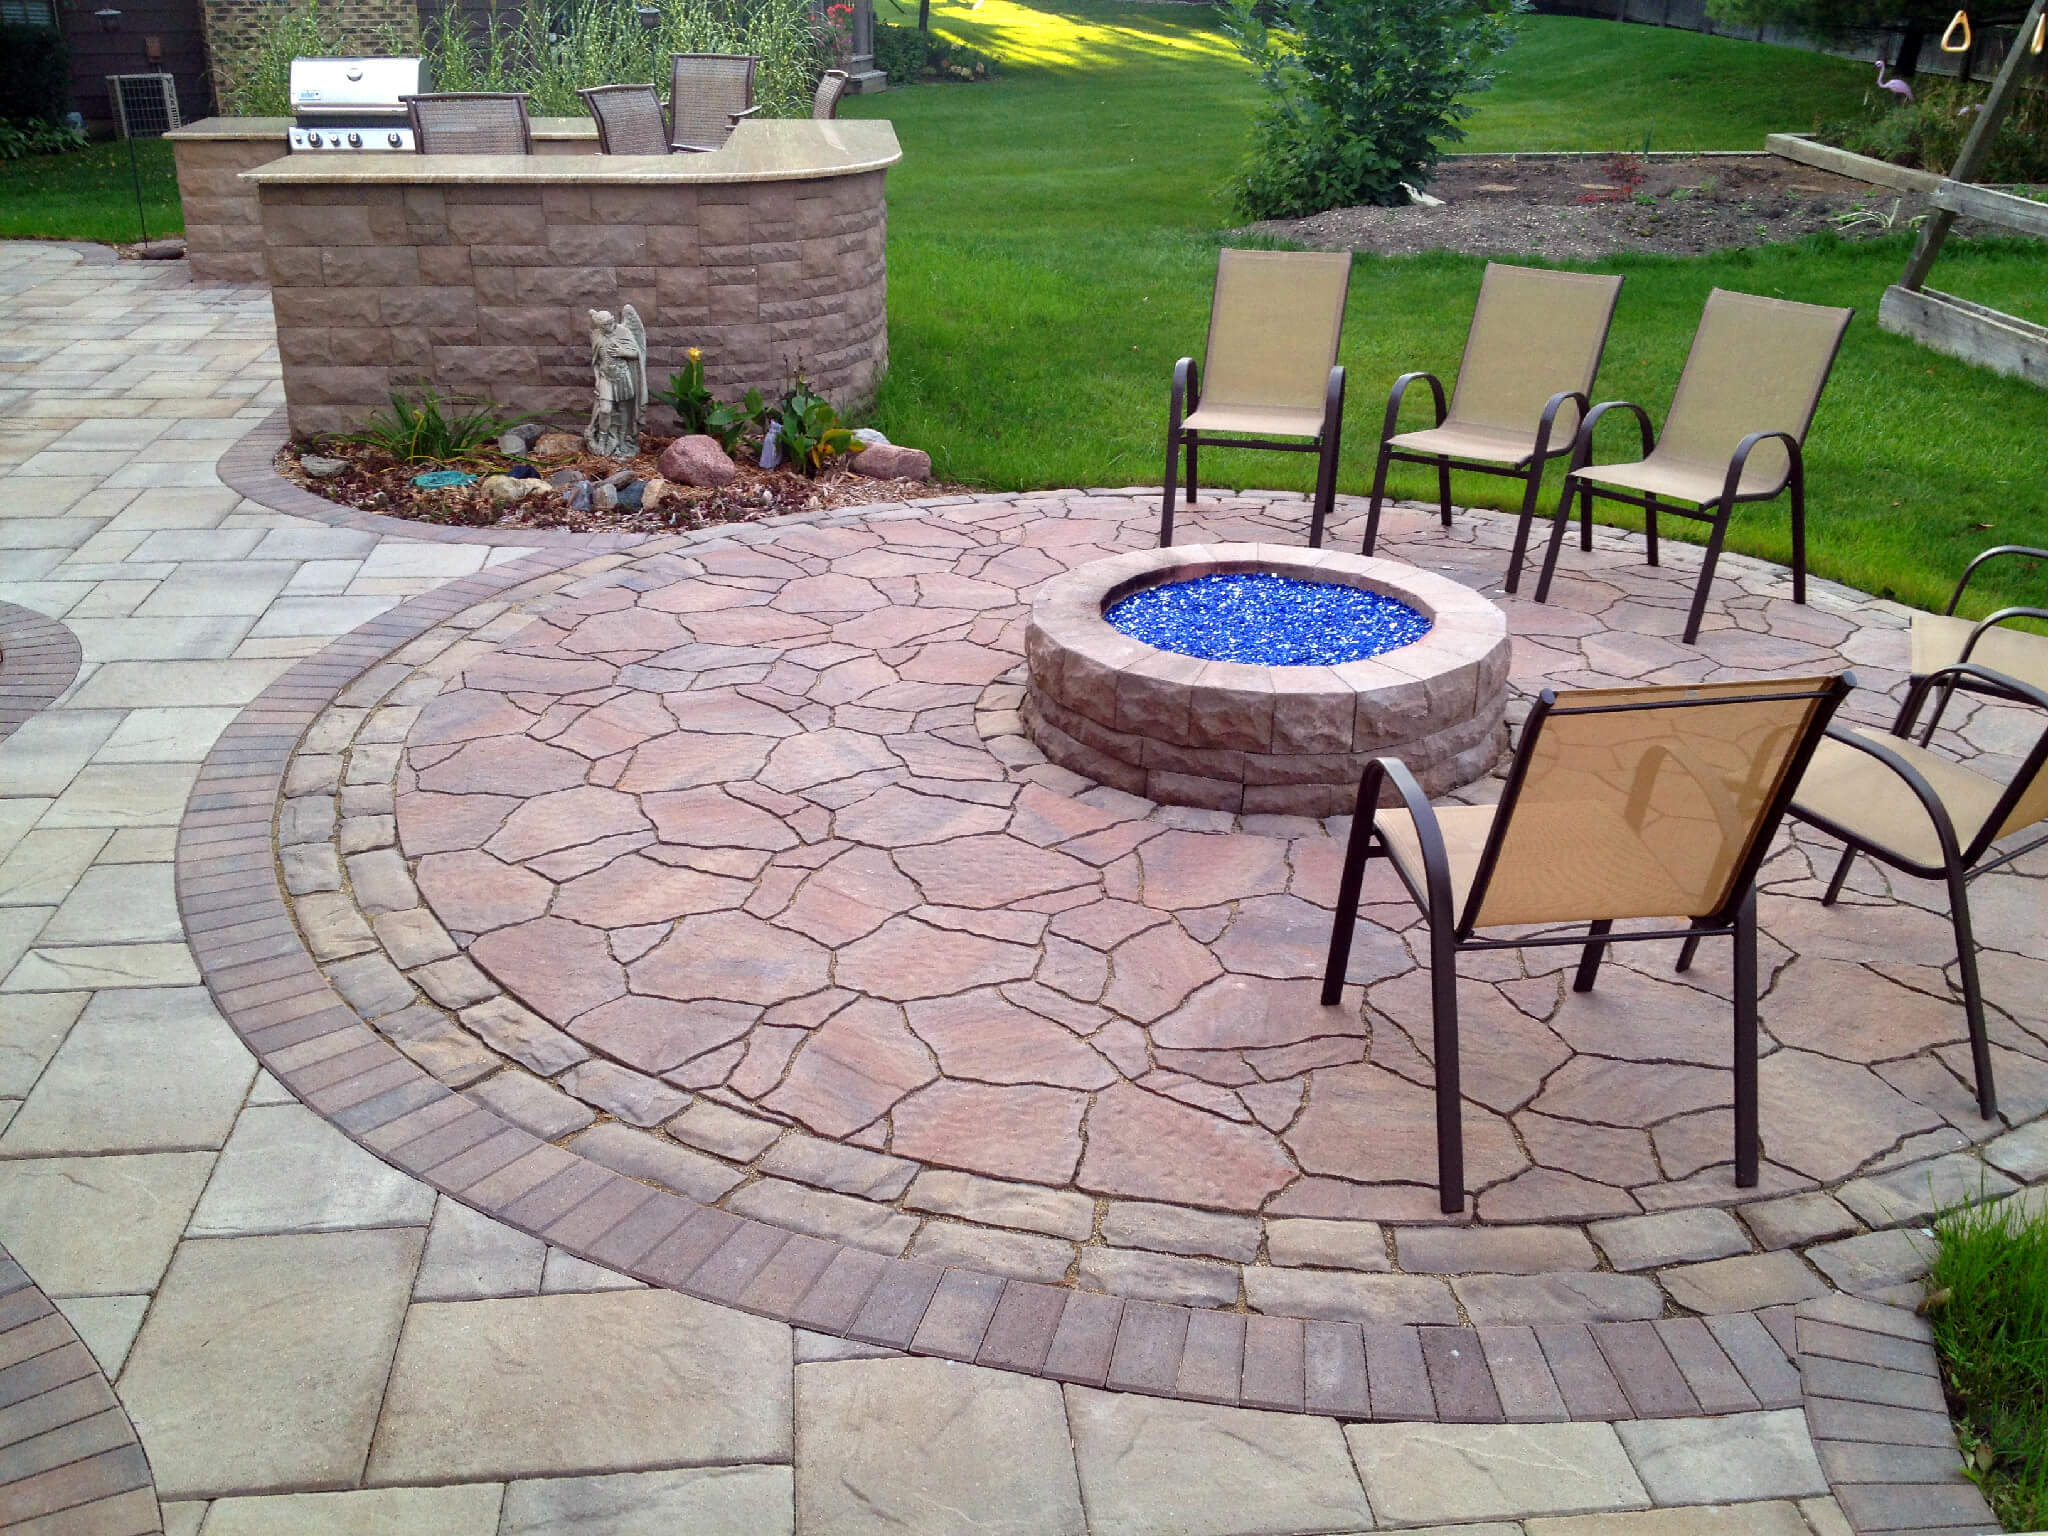 Patio with kitchen and fire pit